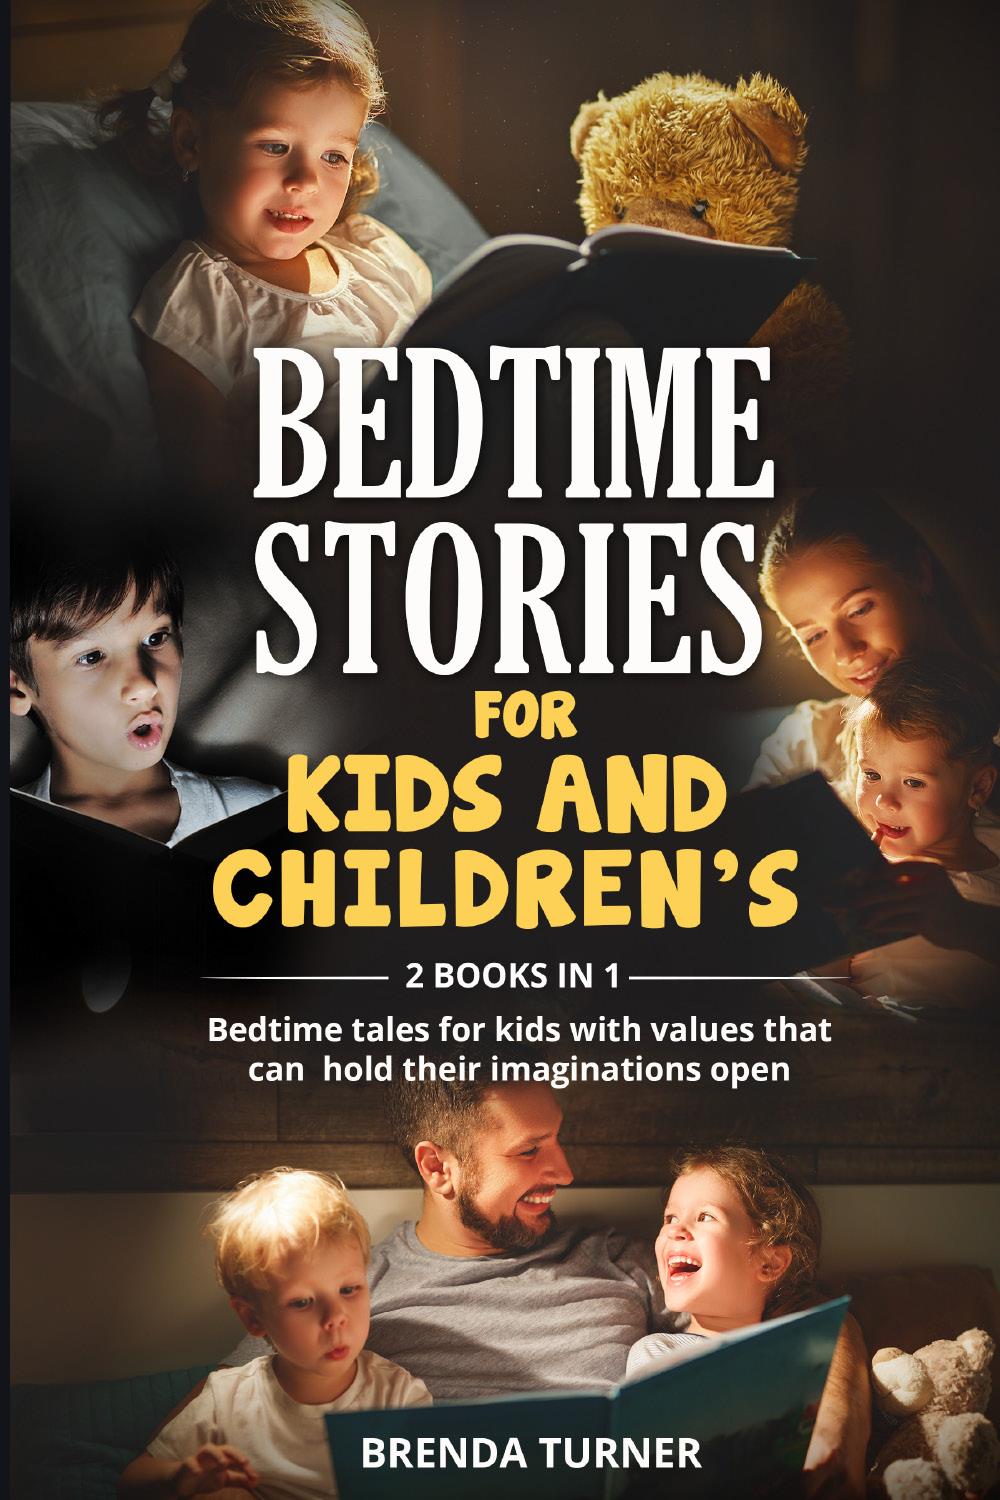 BEDTIME STORIES FOR KIDS AND CHILDREN’S (2 Books in 1)